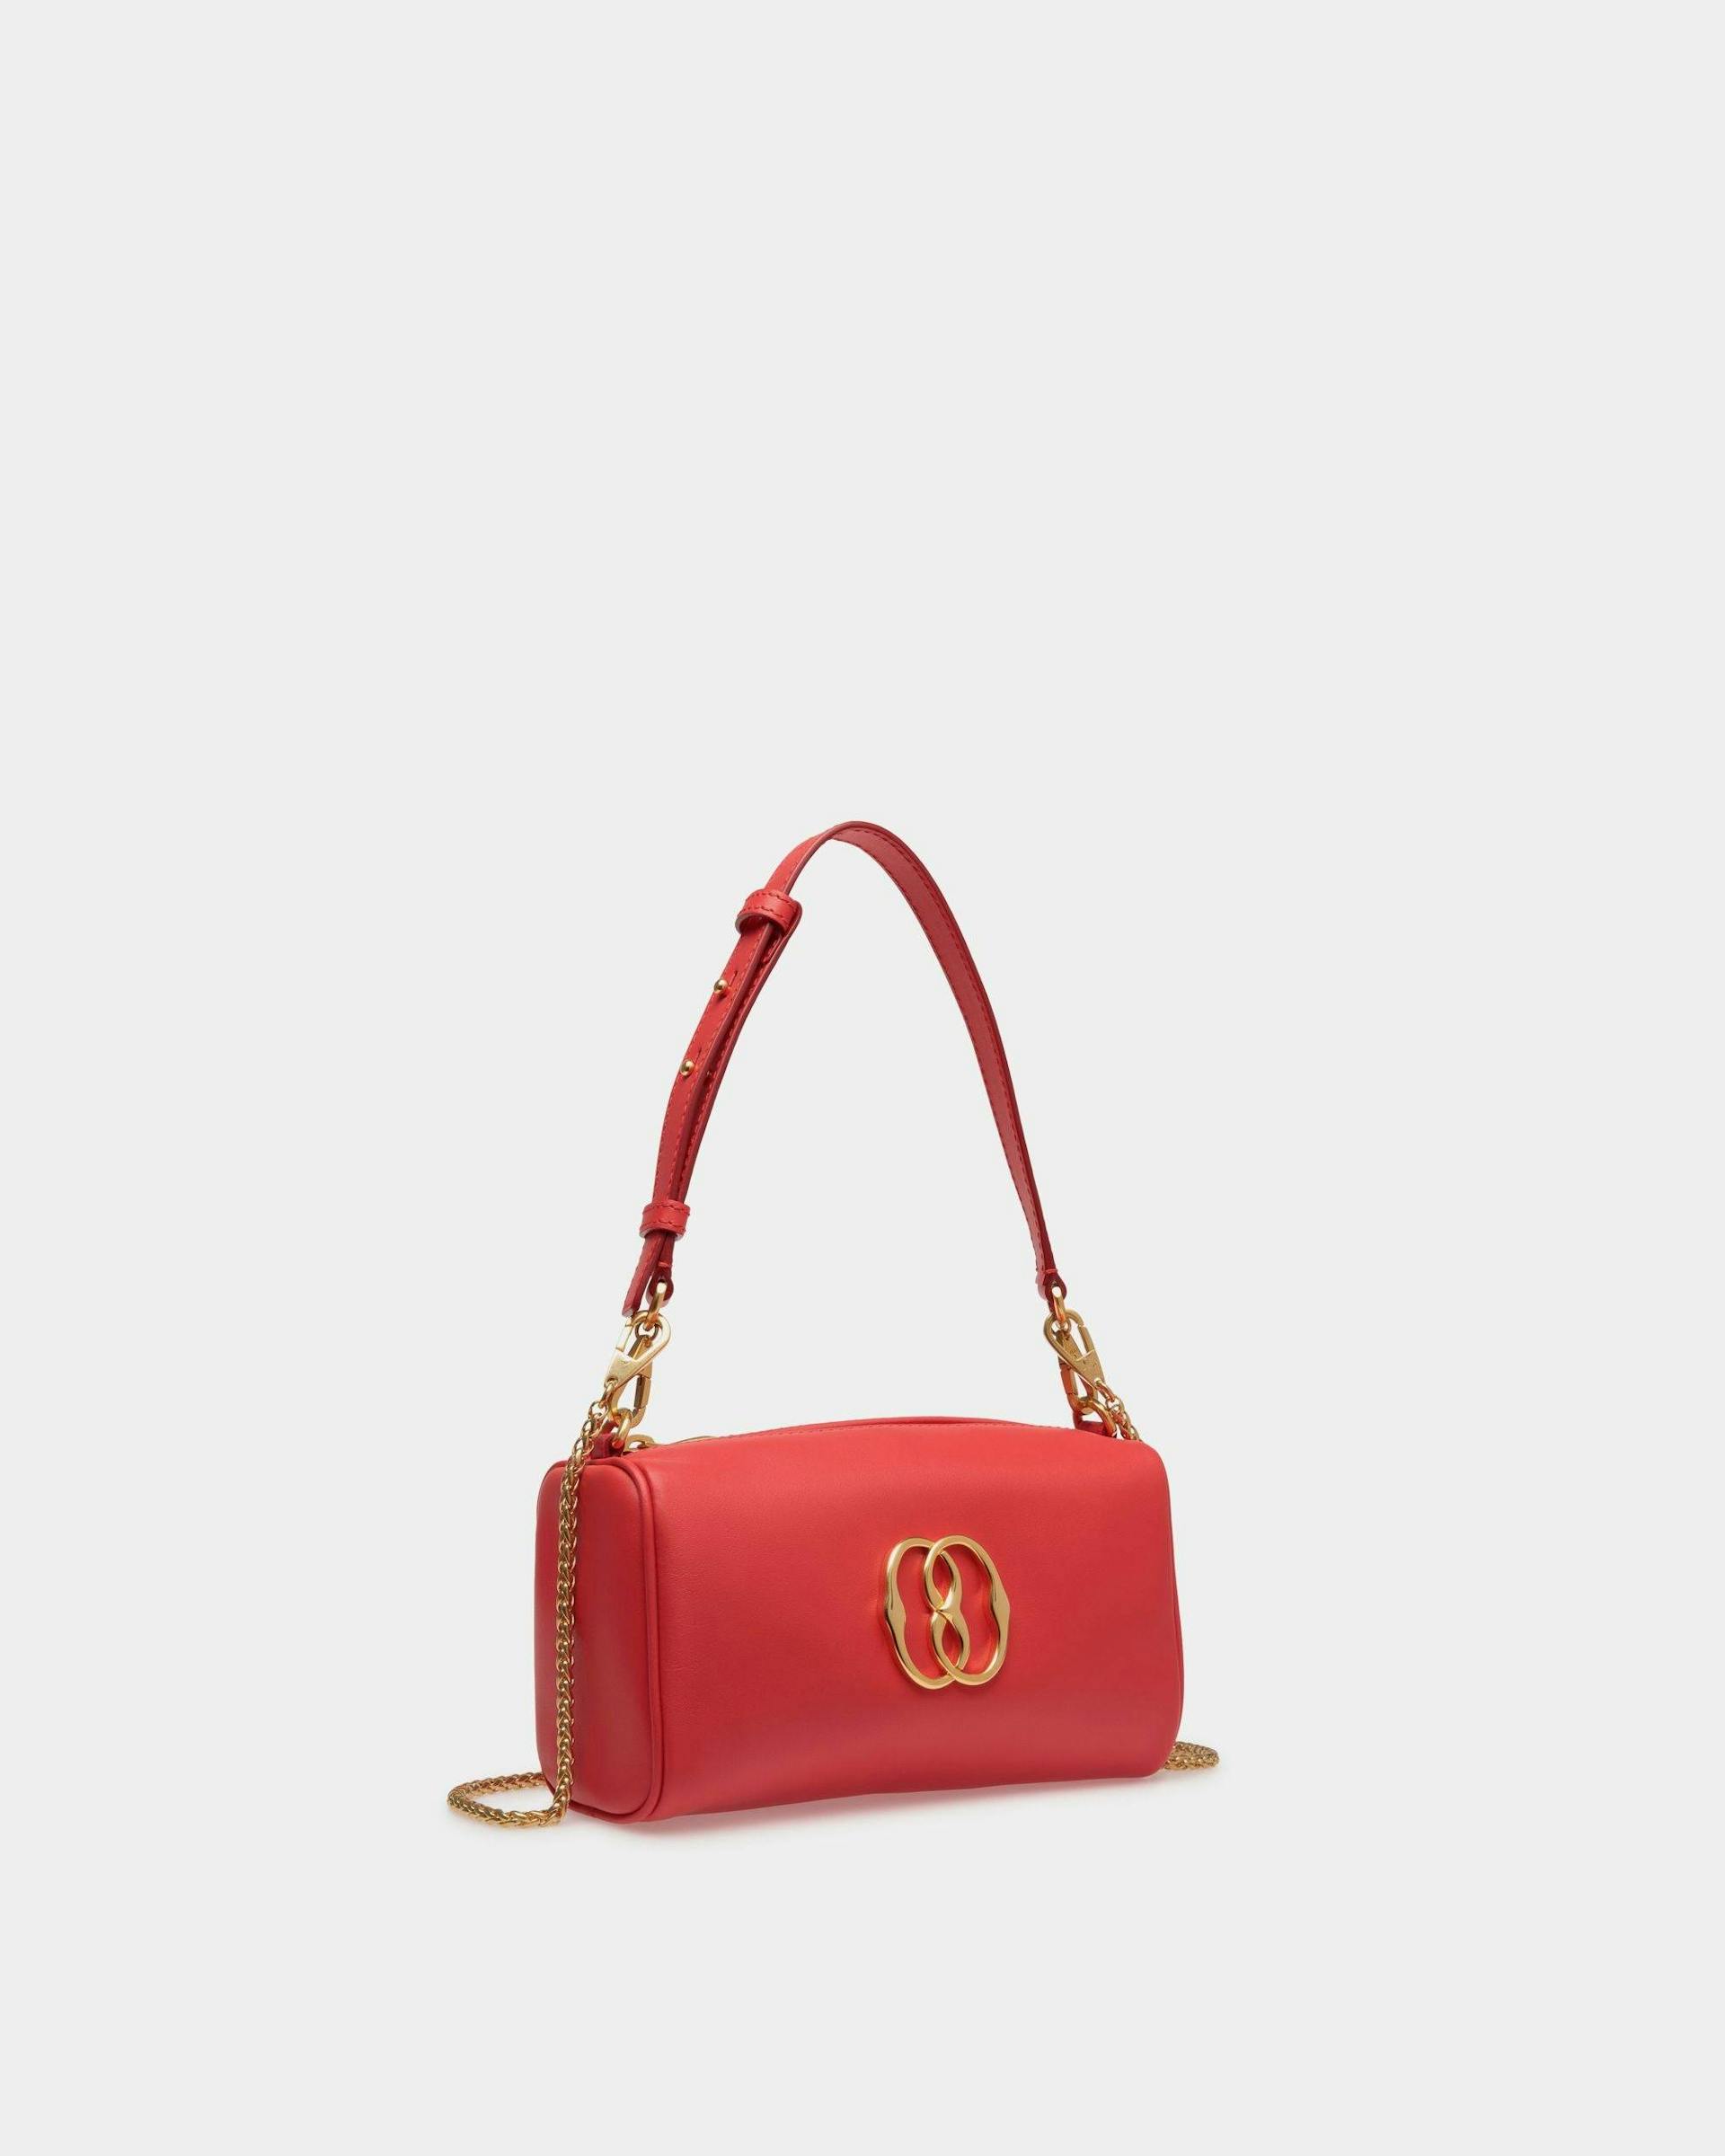 Women's Emblem Mini Bag In Red Leather | Bally | Still Life 3/4 Front